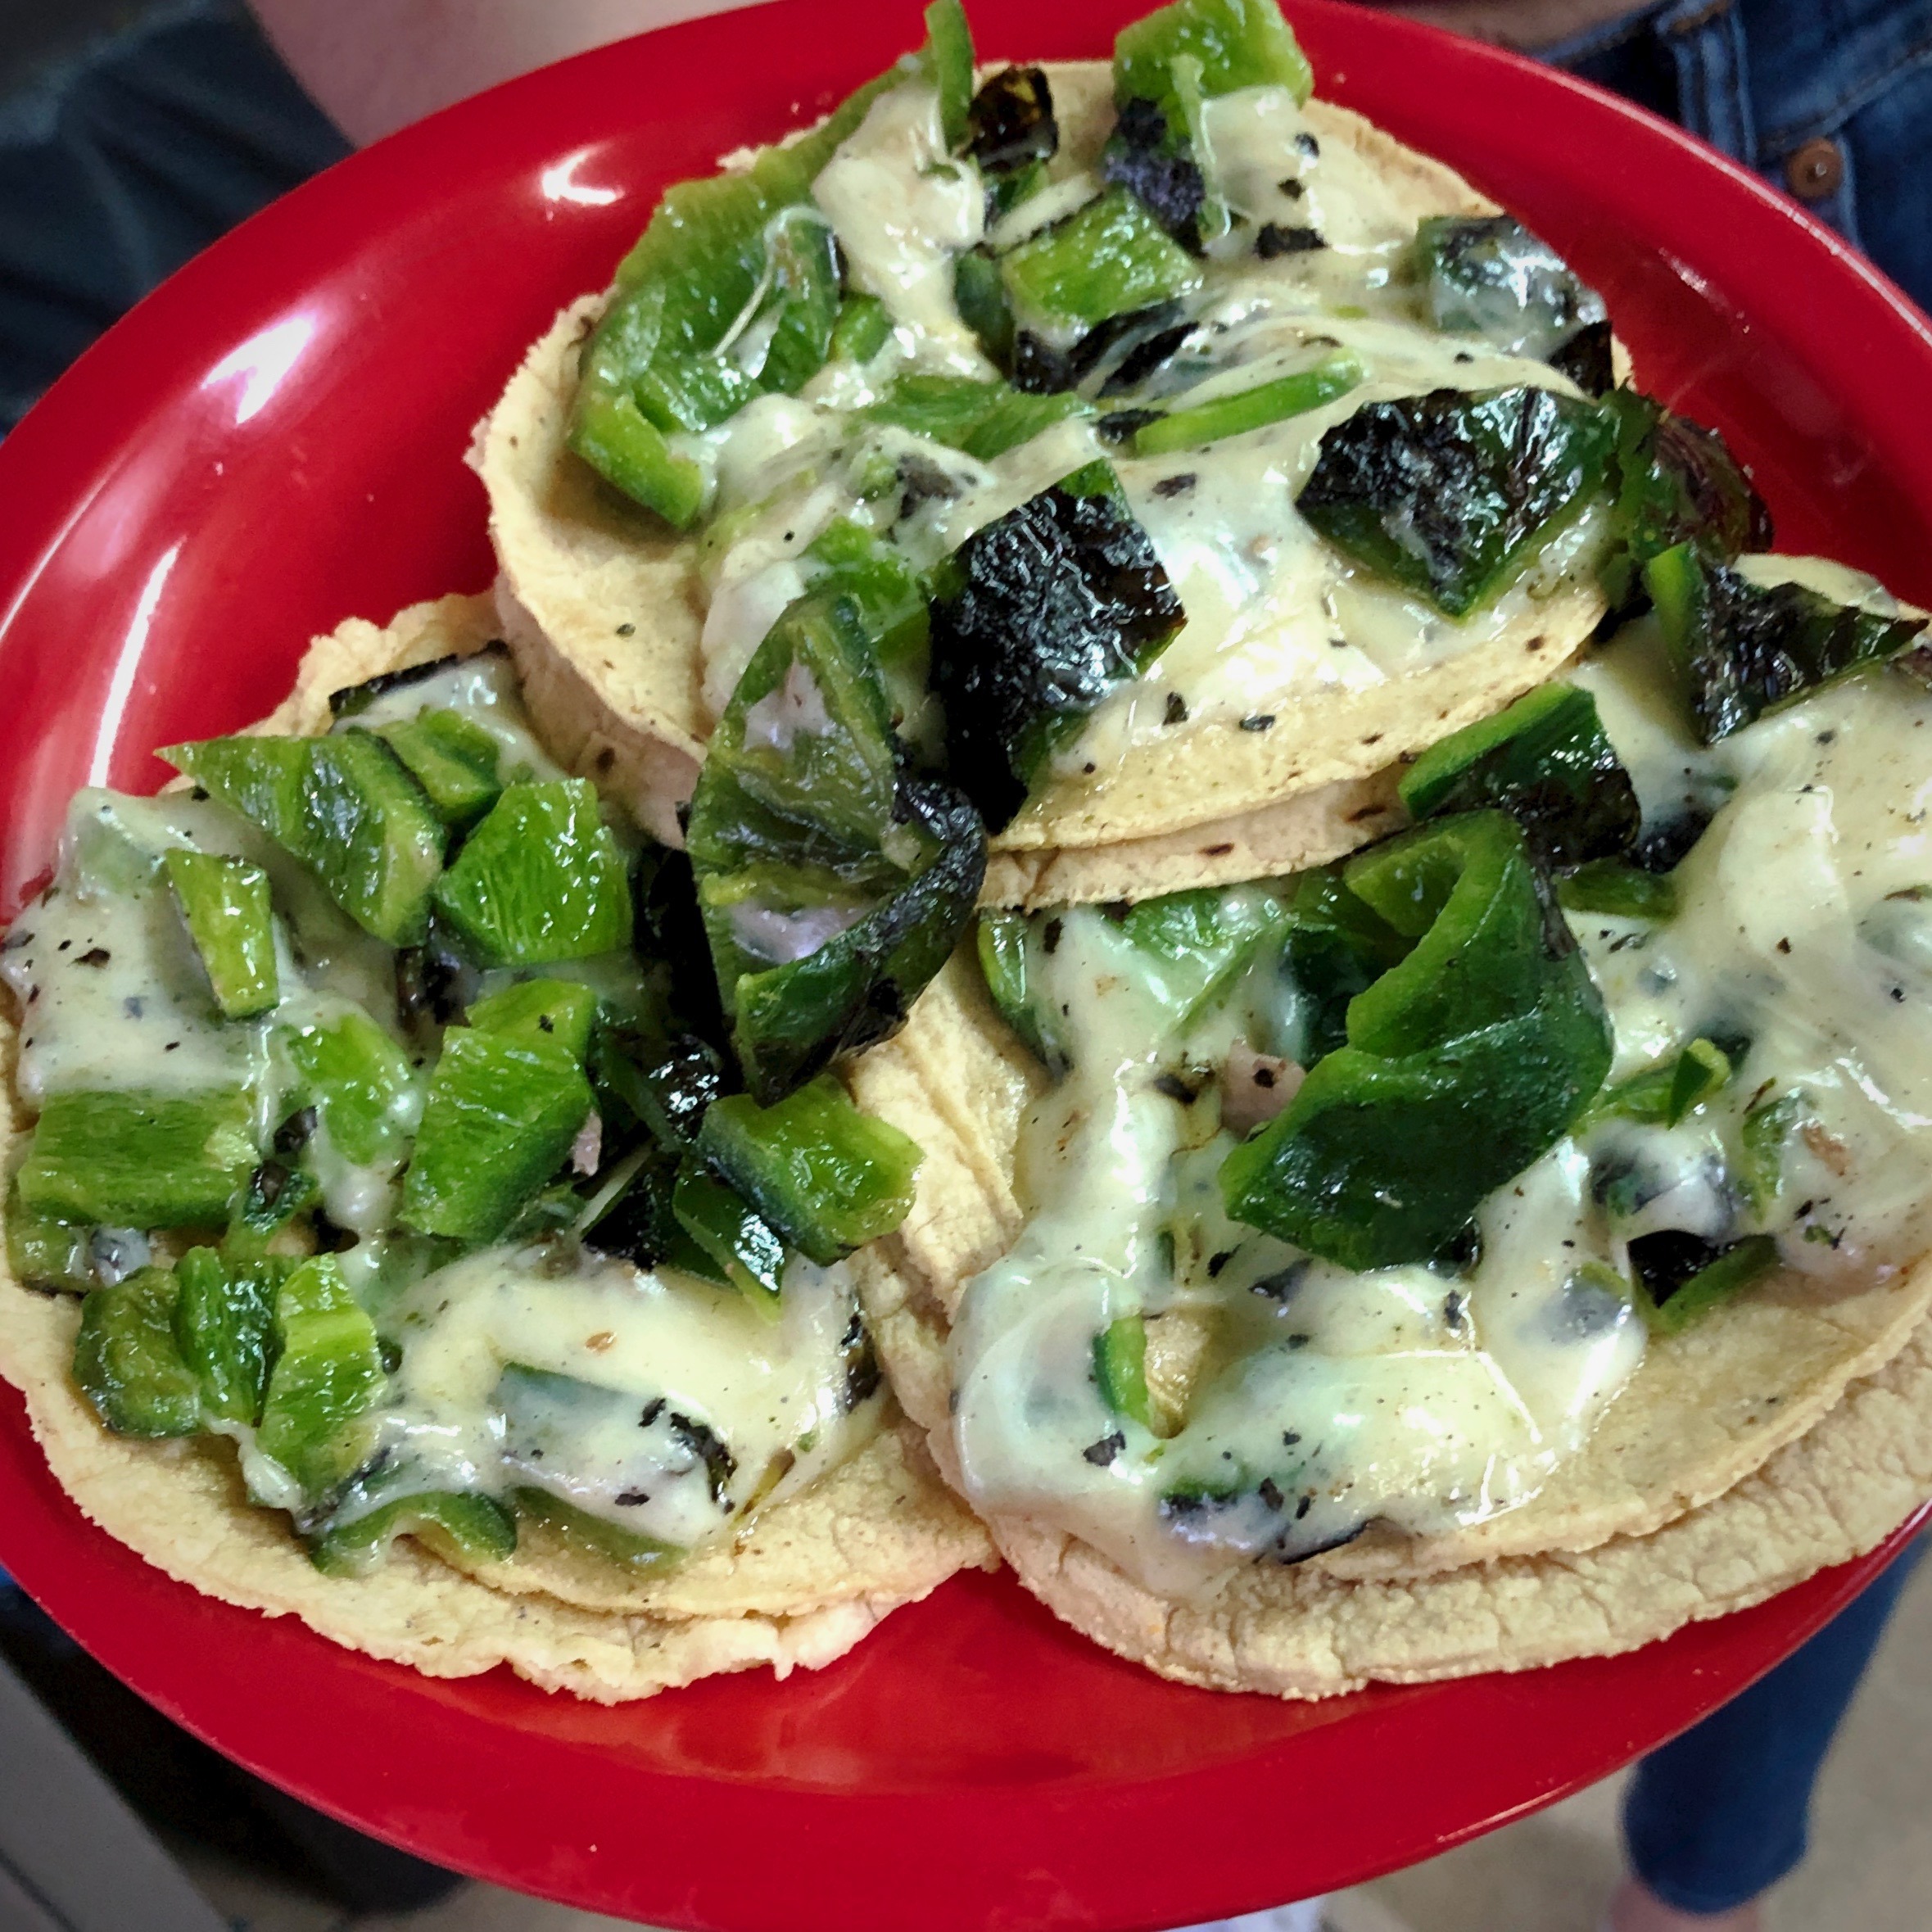 Three tacos with roasted poblano pepper pieces and melted cheese on a red plate